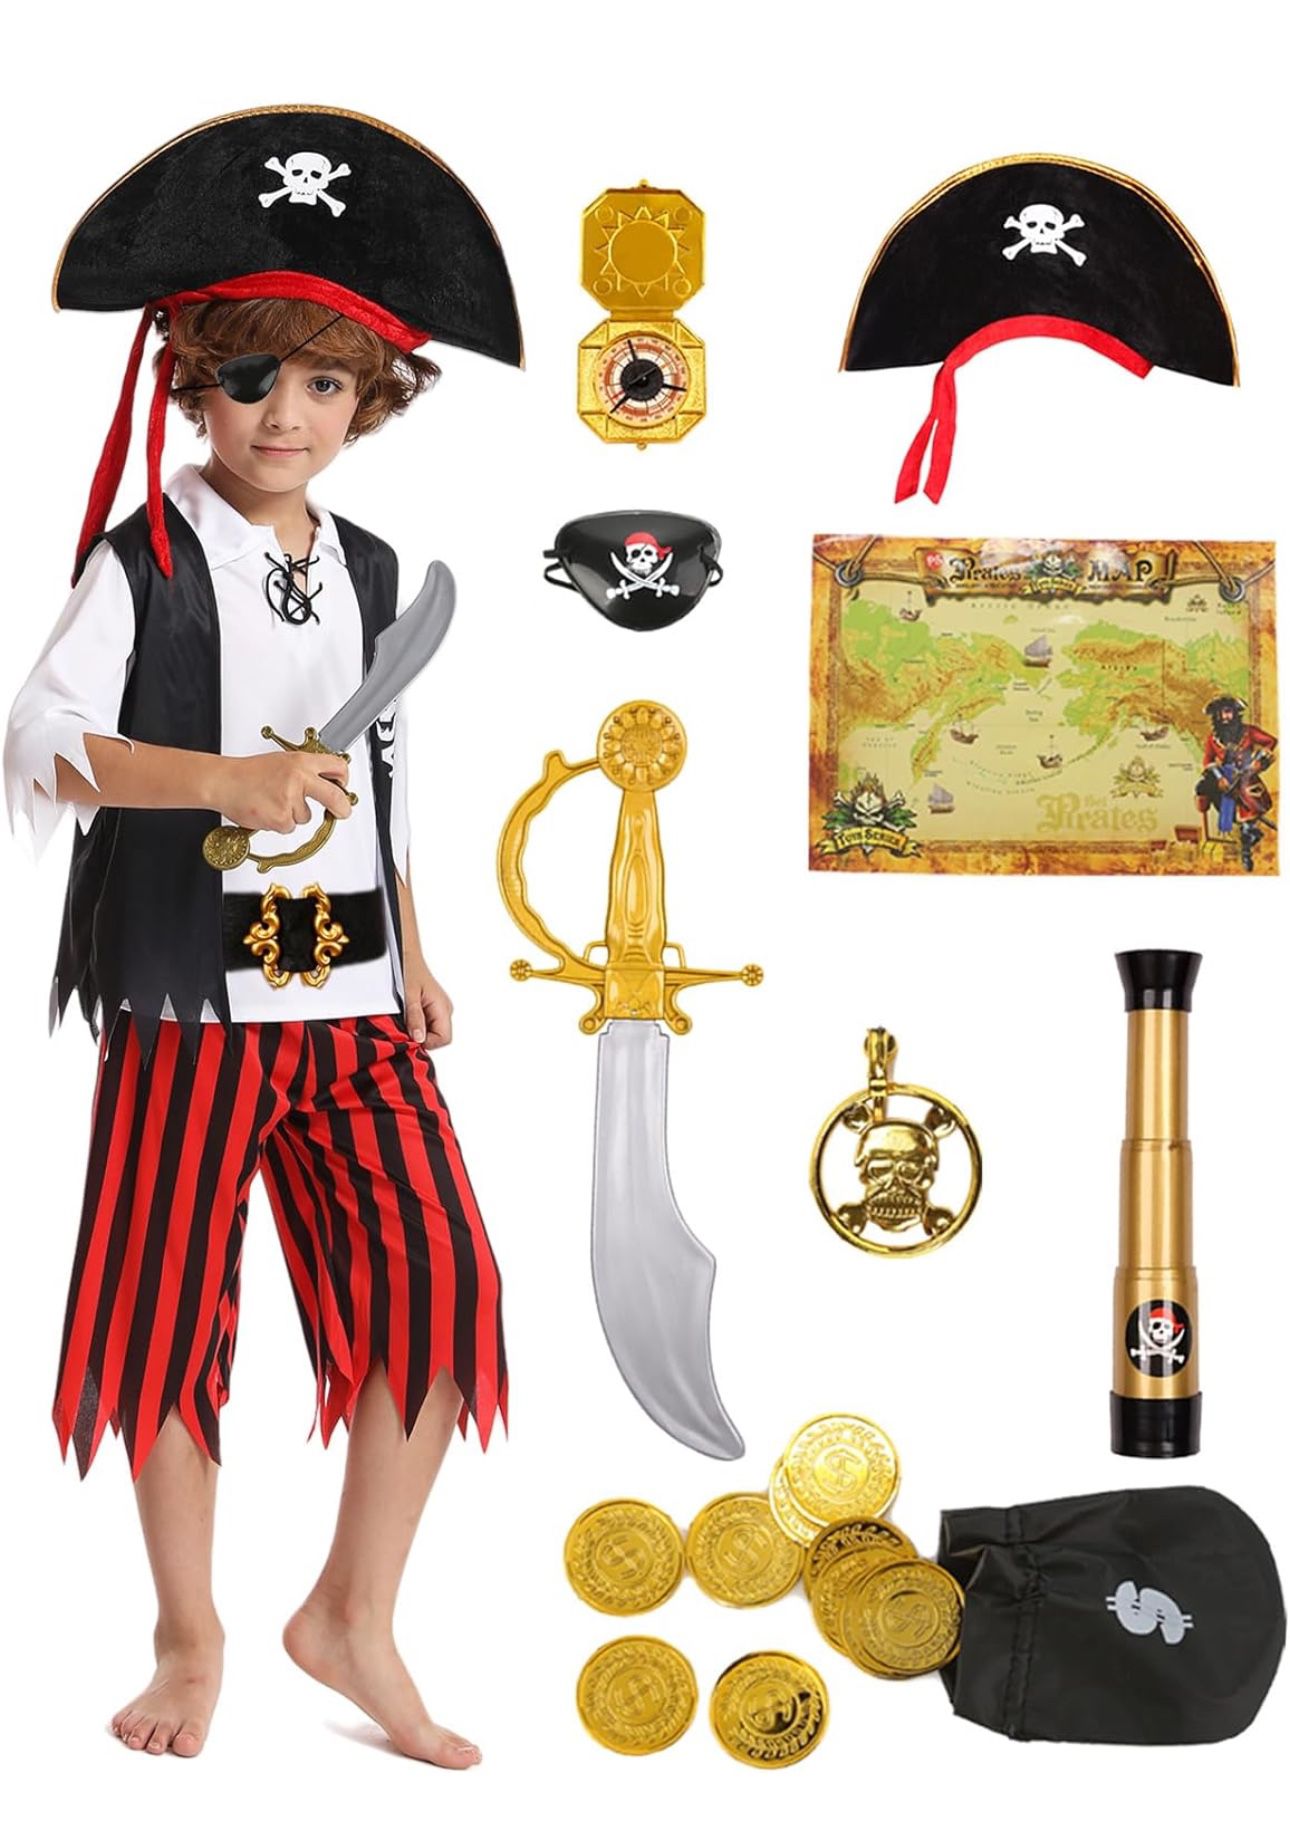 Boys Pirate Costume Kids Halloween Costume Cosplay Role Play with Deluxe Accessories Birthday Gifts